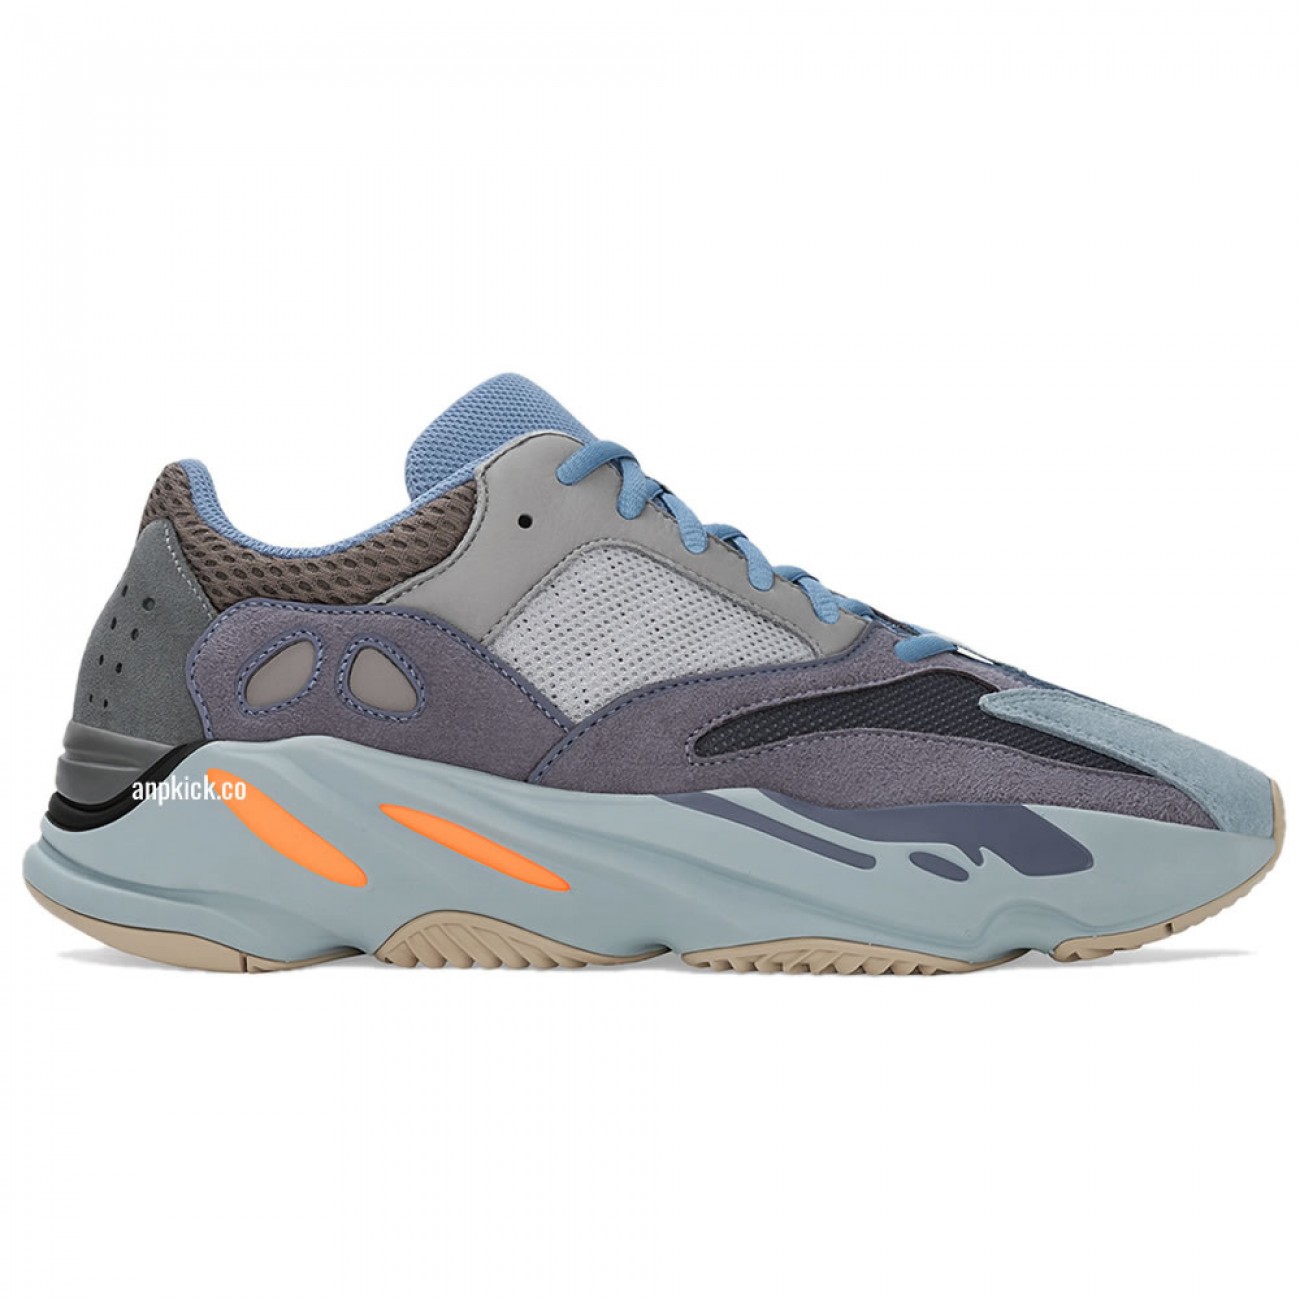 adidas Yeezy Boost 700 "Carbon Blue" Release Date FW2498